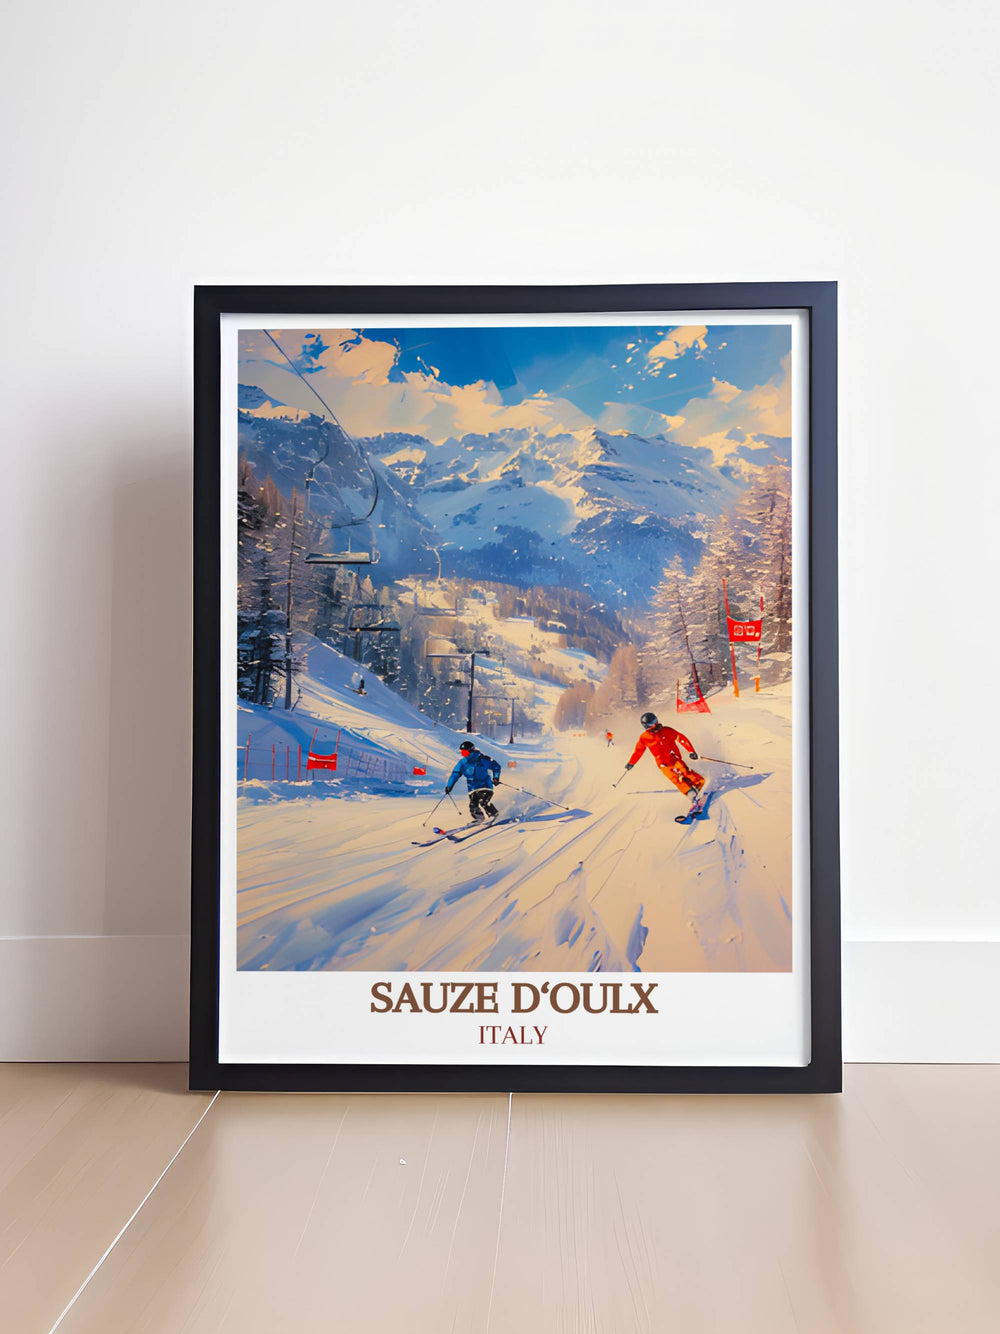 Experience the elegance of Sauze dOulx with our Framed Art collection, showcasing picturesque views and luxurious amenities in stunning detail.